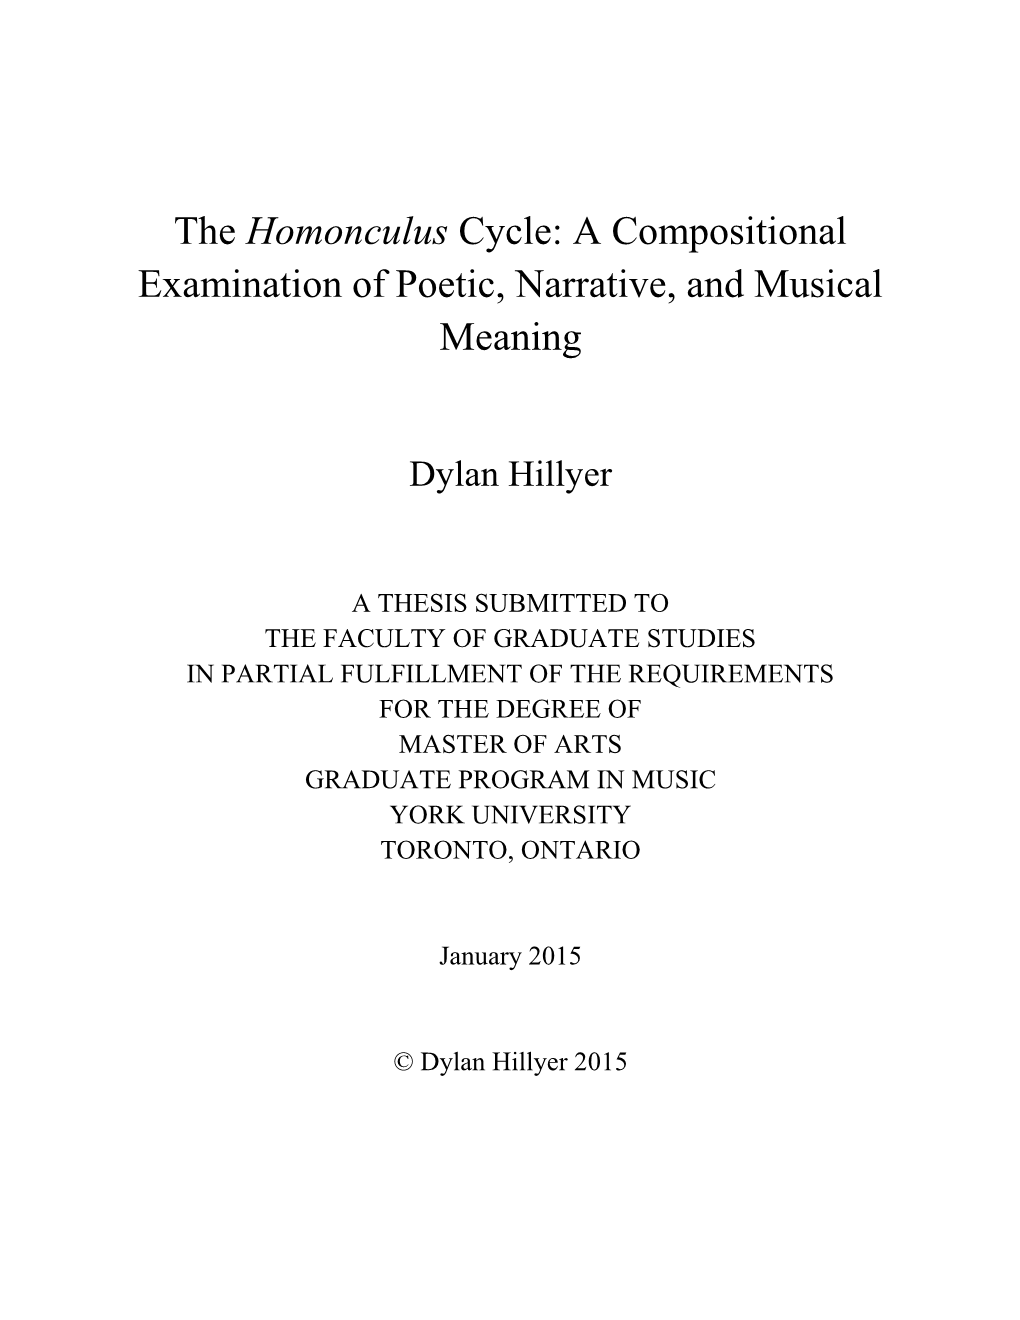 The Homonculus Cycle: a Compositional Examination of Poetic, Narrative, and Musical Meaning